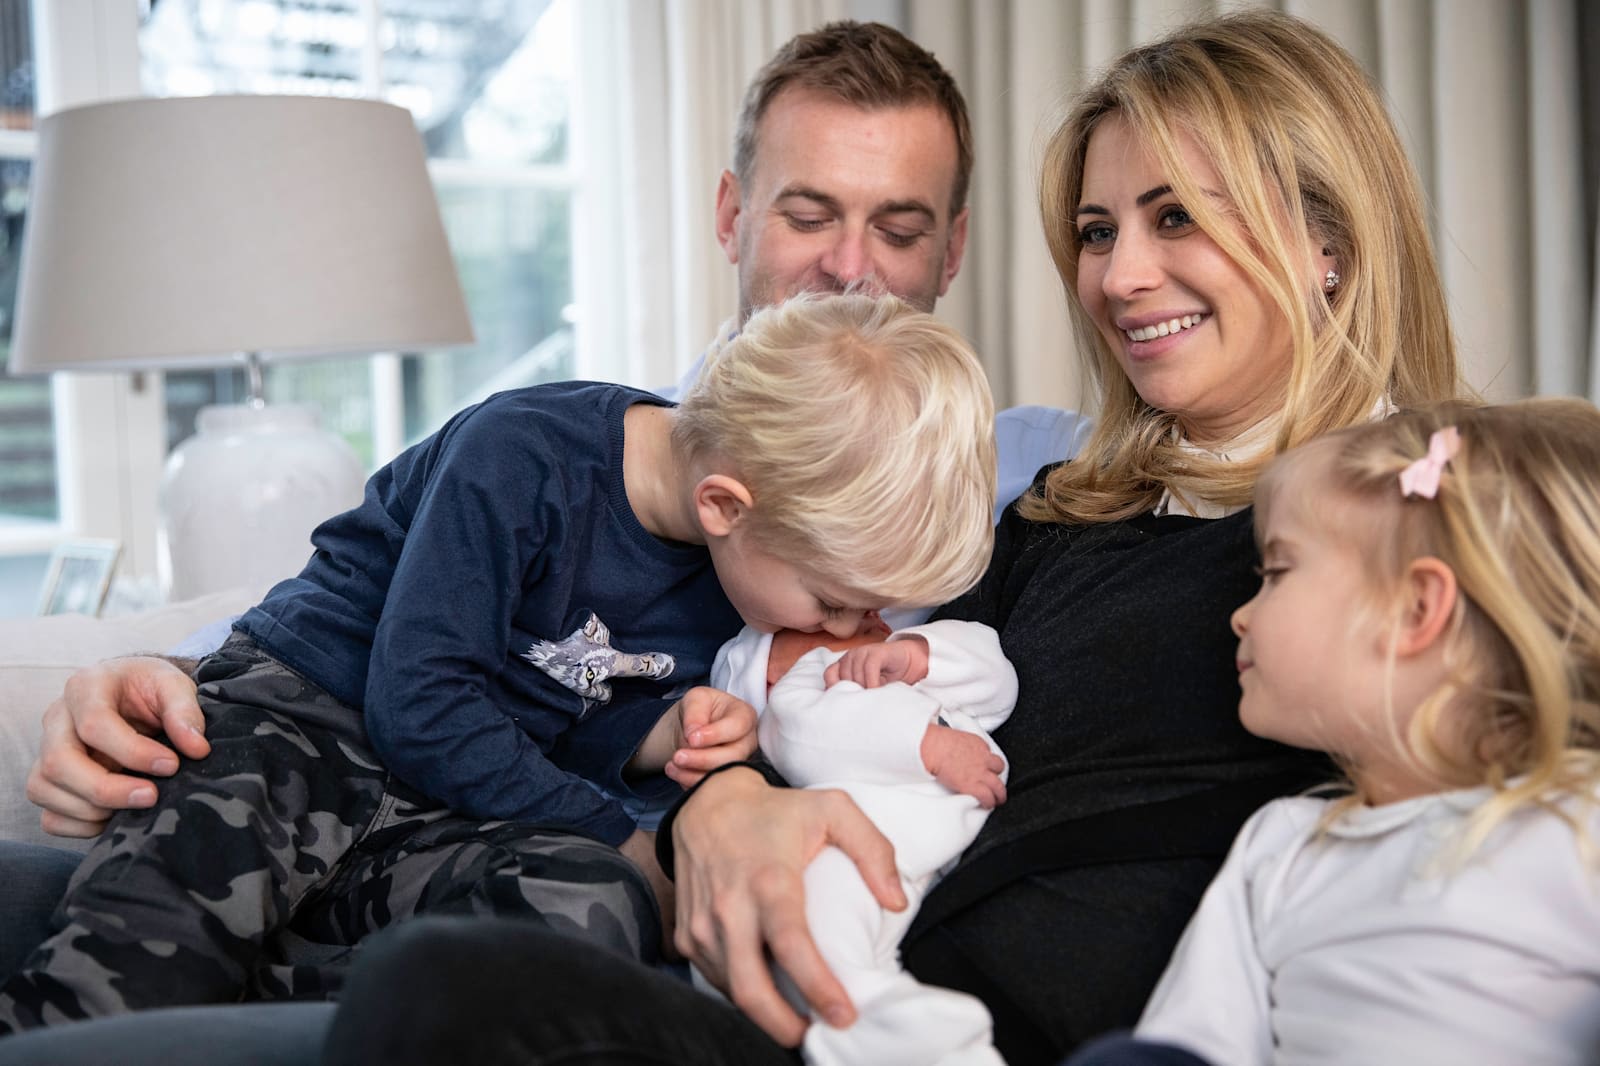 Holly Branson with her husband Freddie Andrewes and three children